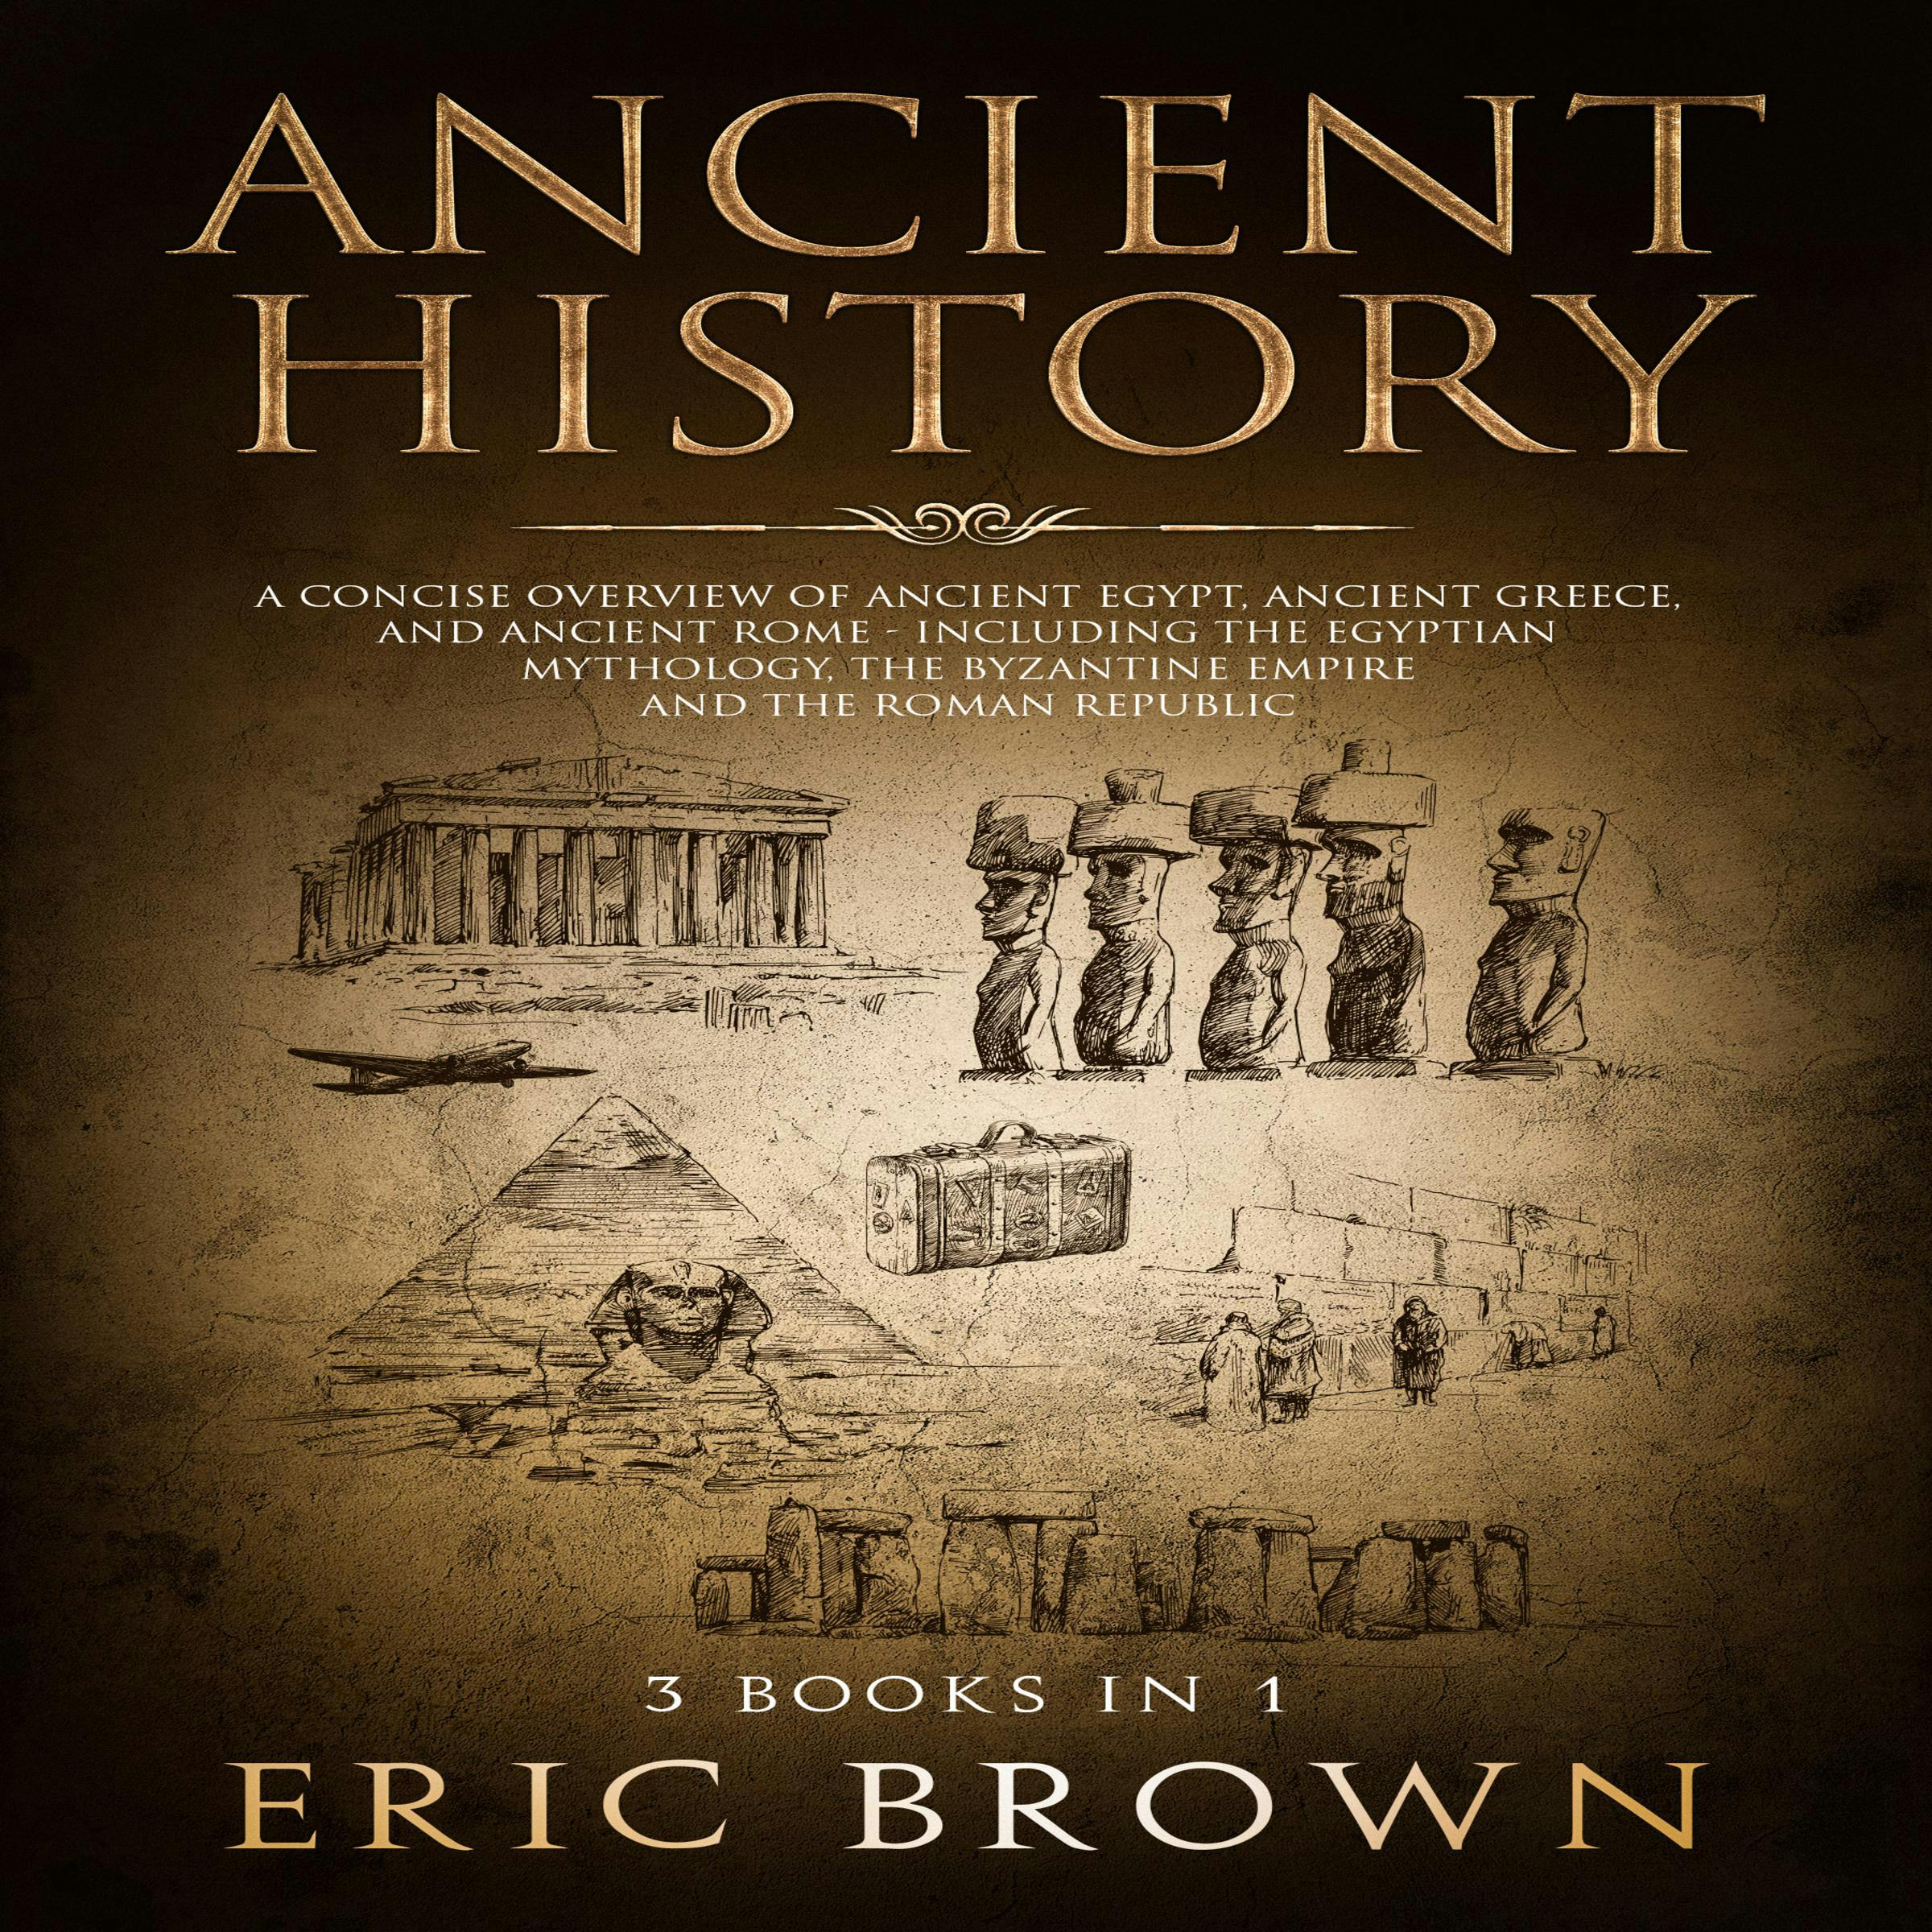 Ancient History: A Concise Overview of Ancient Egypt, Ancient Greece, and Ancient Rome: Including the Egyptian Mythology, the Byzantine Empire and the Roman Republic - Eric Brown